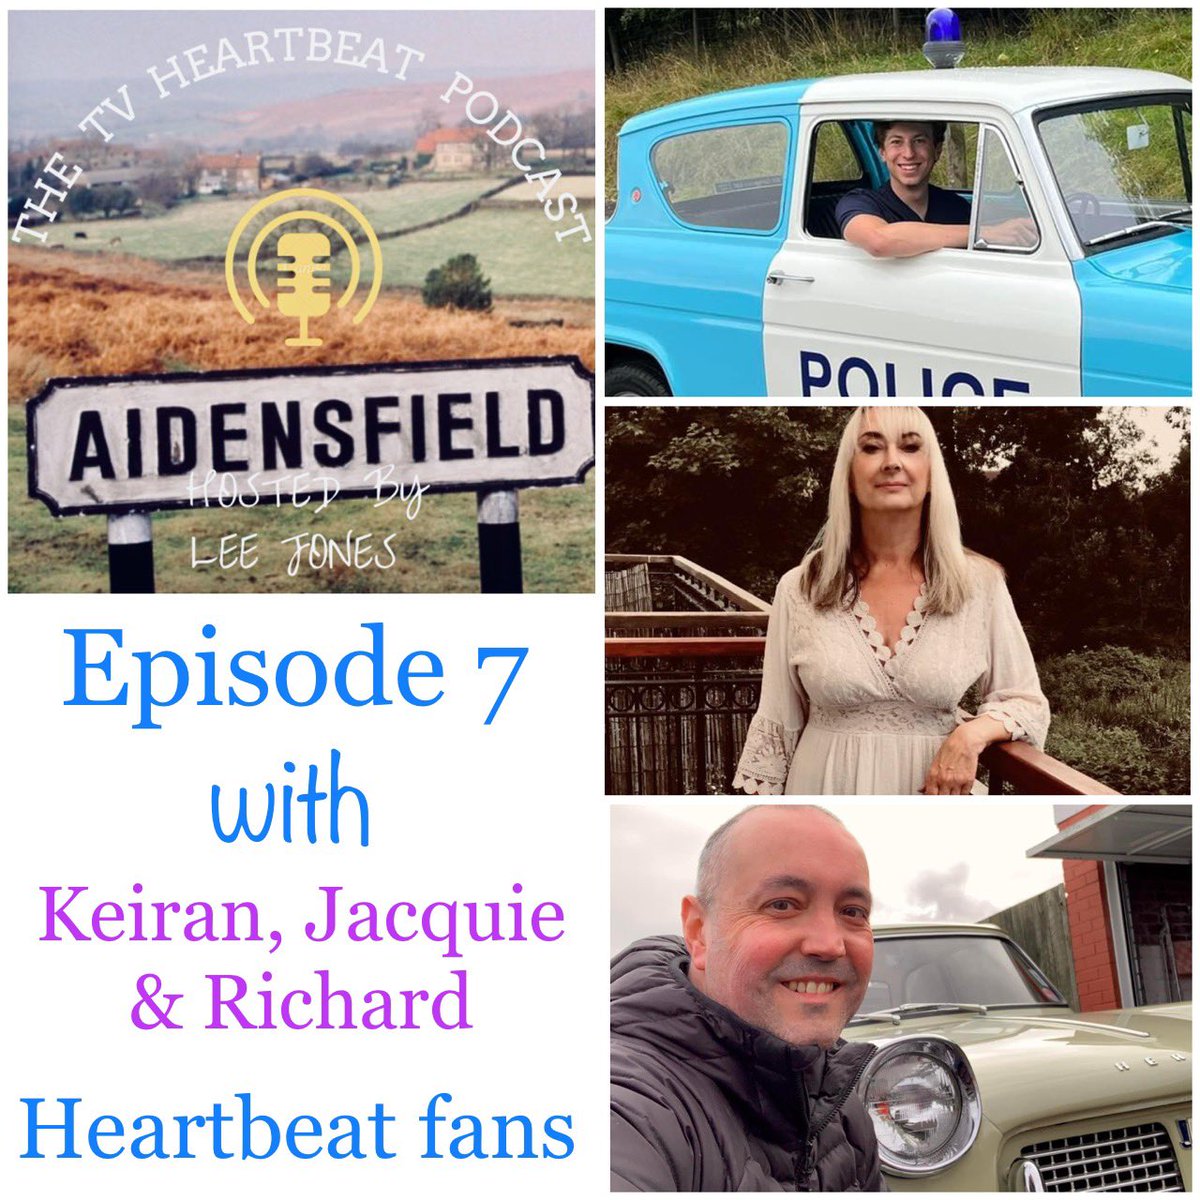 It’s our penultimate #TVHeartbeatPodcast today and I’m chatting to some #Heartbeat super fans - @JacquelineEmil7 (of @Heartbeatlocat1), @R7CDJ and @PilotKeiran152. You fans out there will hopefully relate to what they say…youtu.be/P1SJTfVZ3Us?fe… - enjoy! 🩵